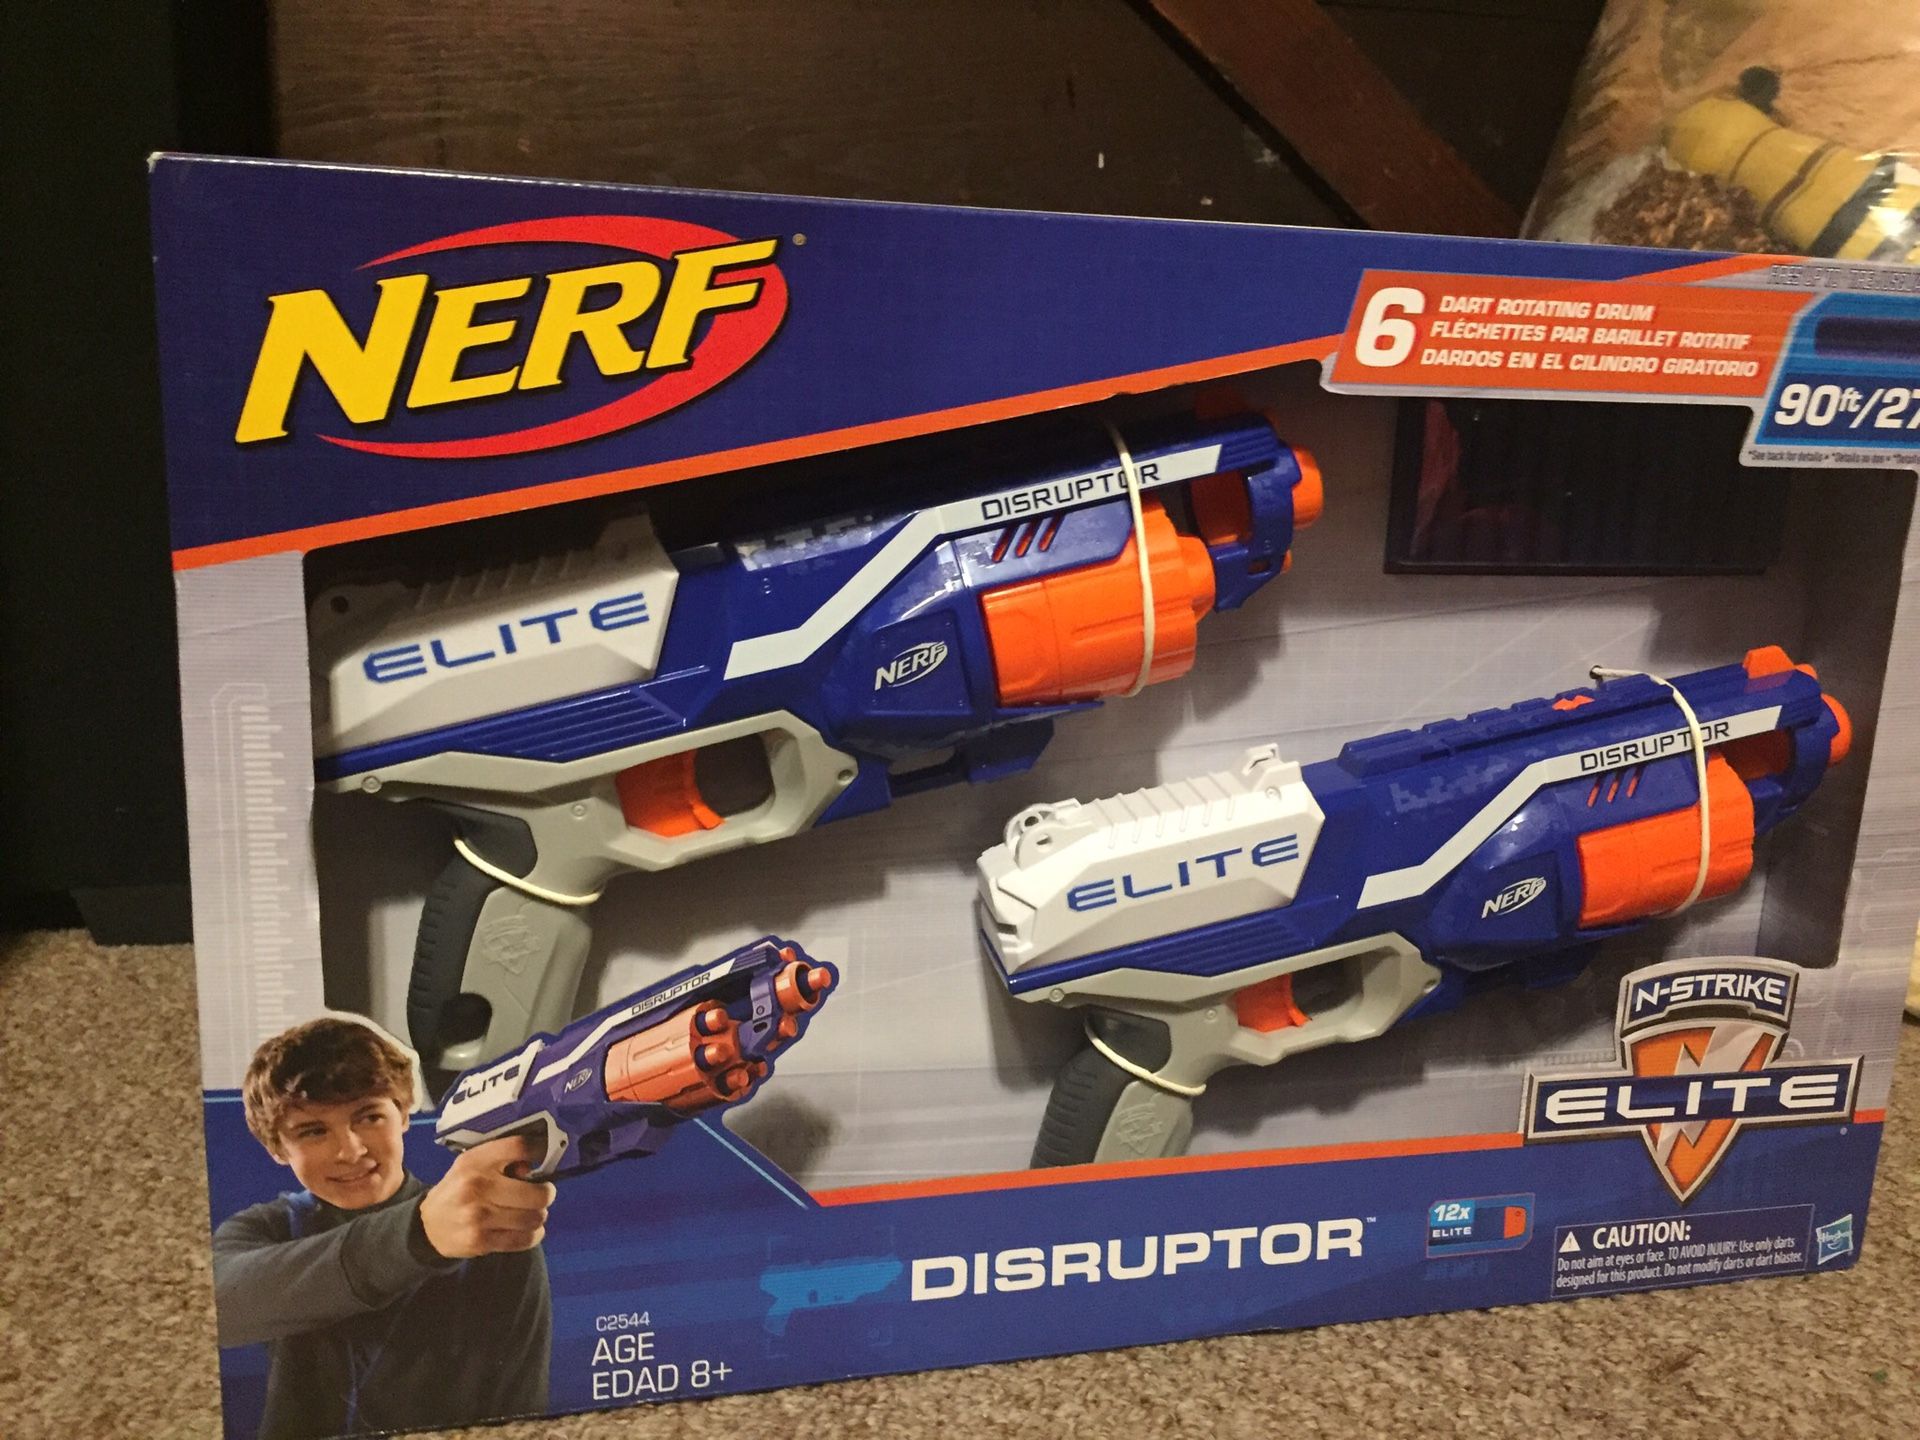 New Nerf gun”s -comes with two guns - Never used